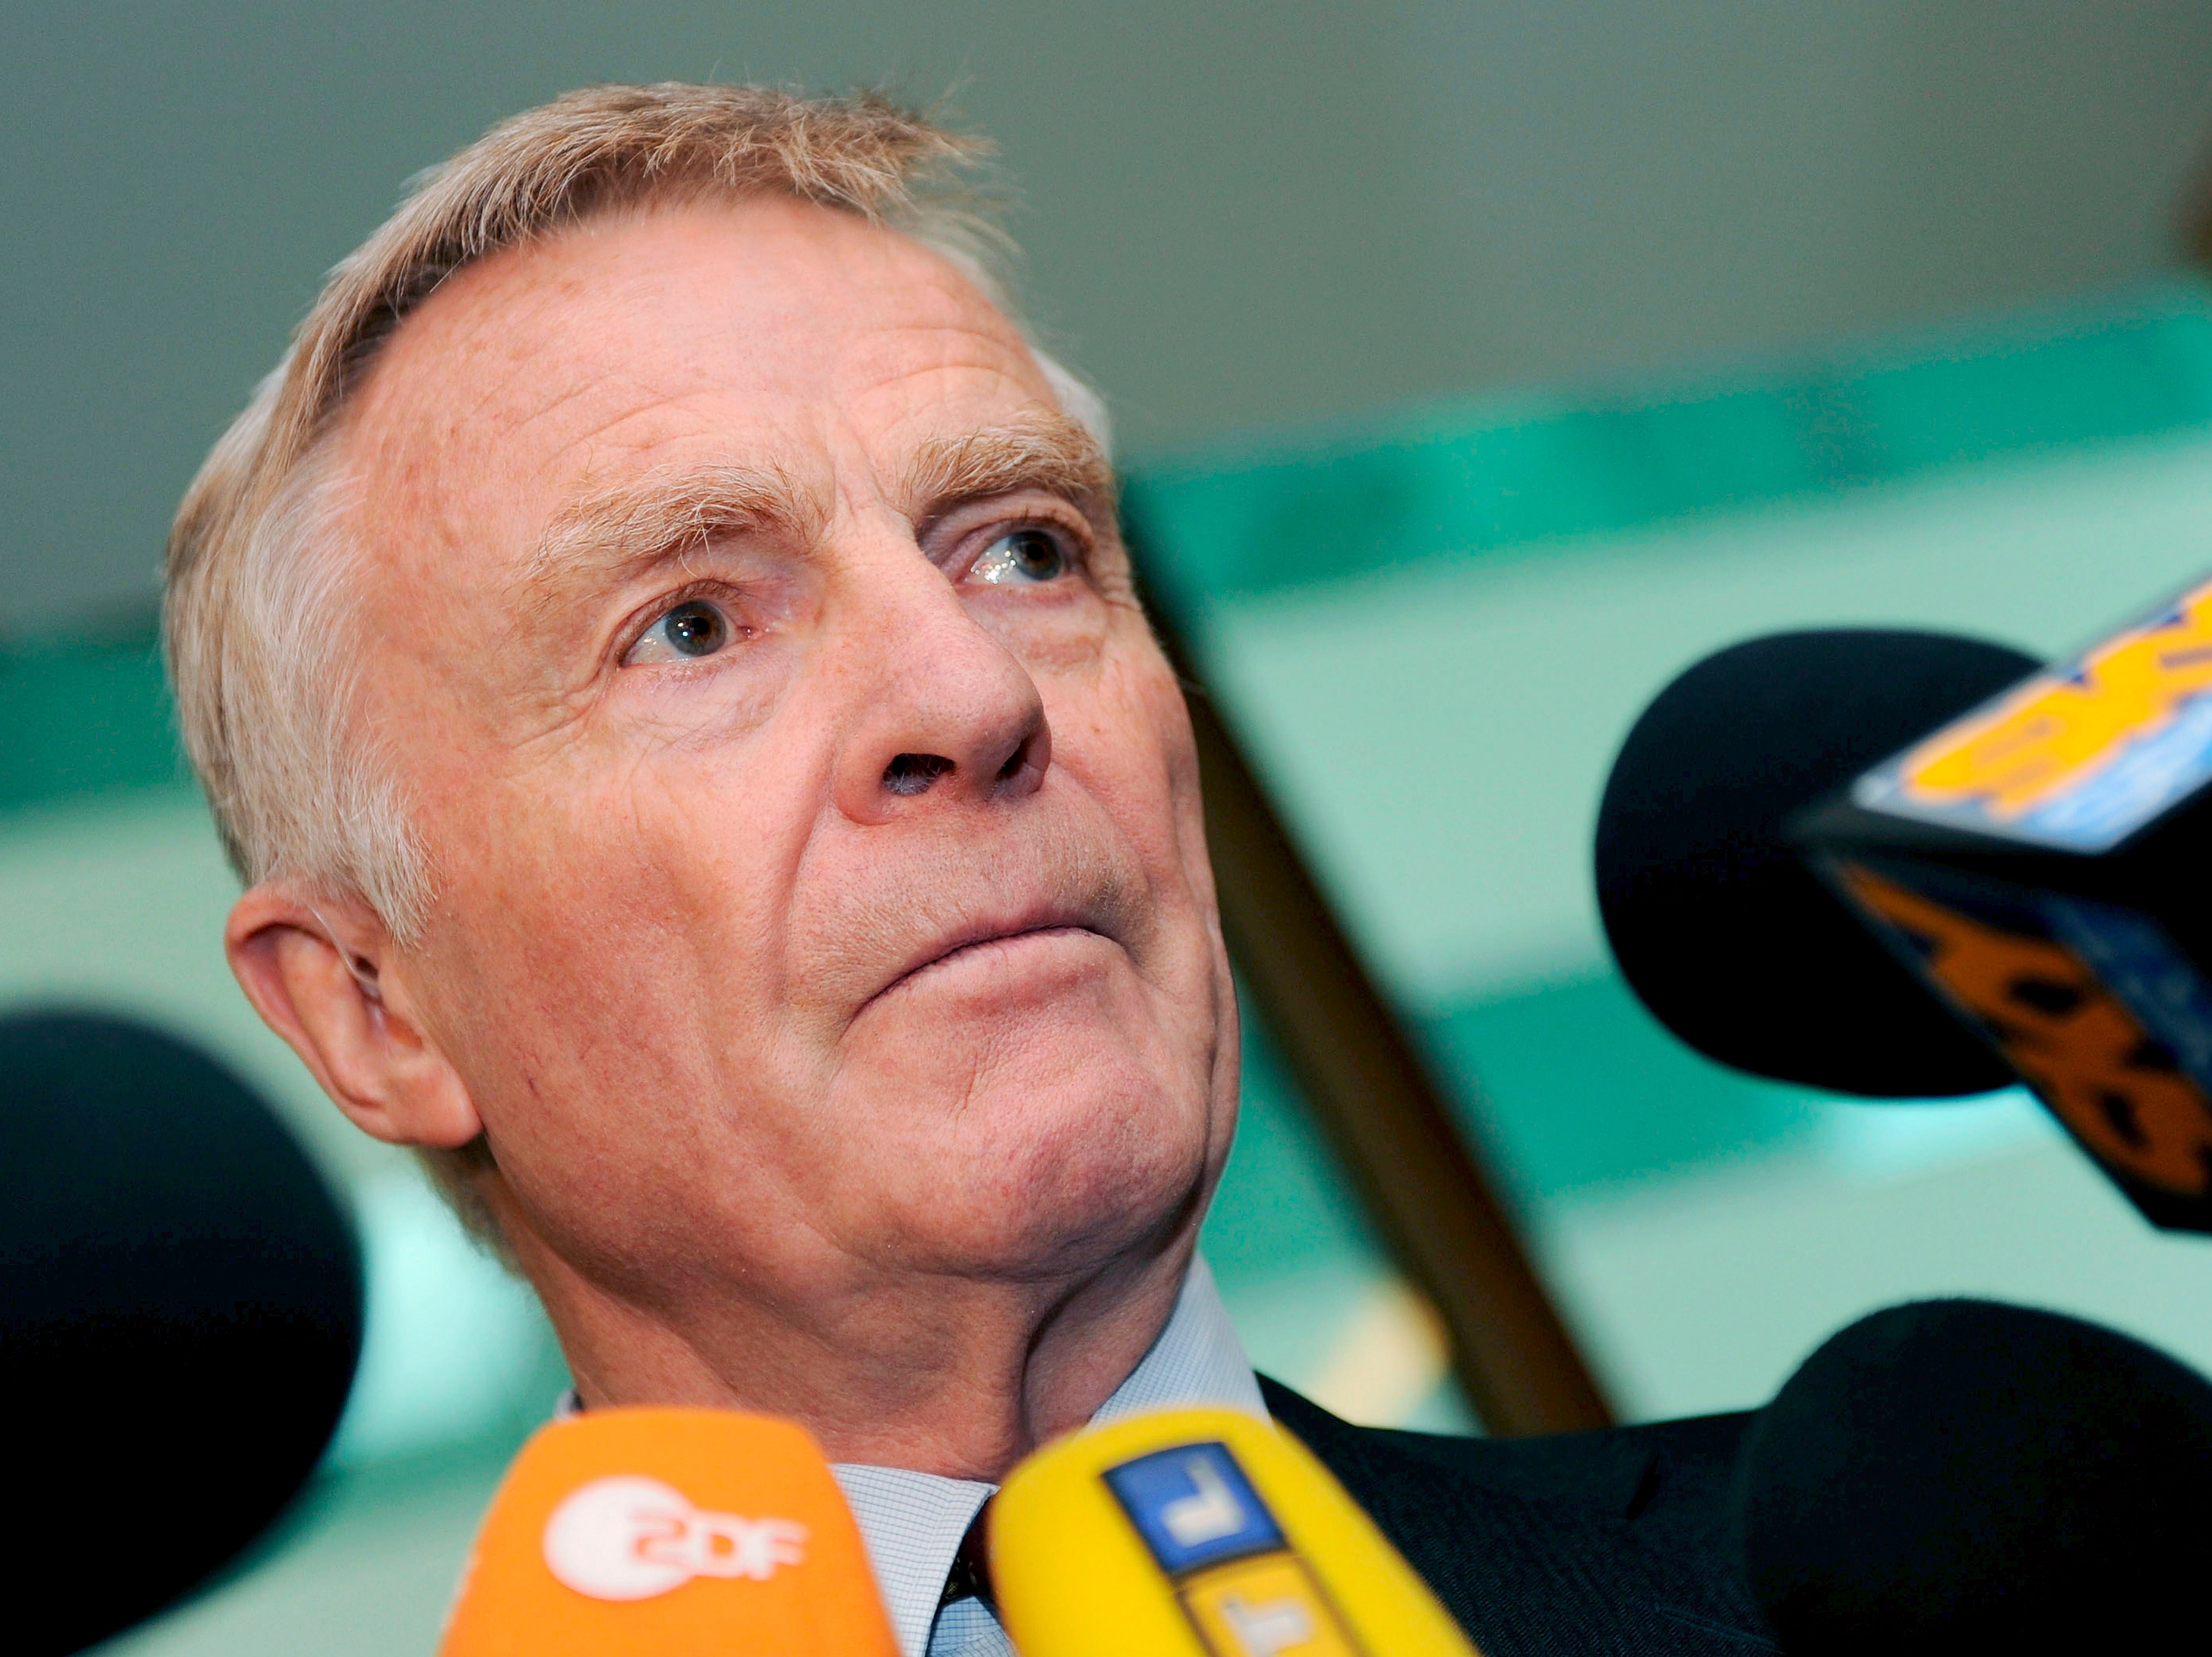 Max Mosley became a prominent supporter of tougher press regulation following damaging allegations about his private life in 2008